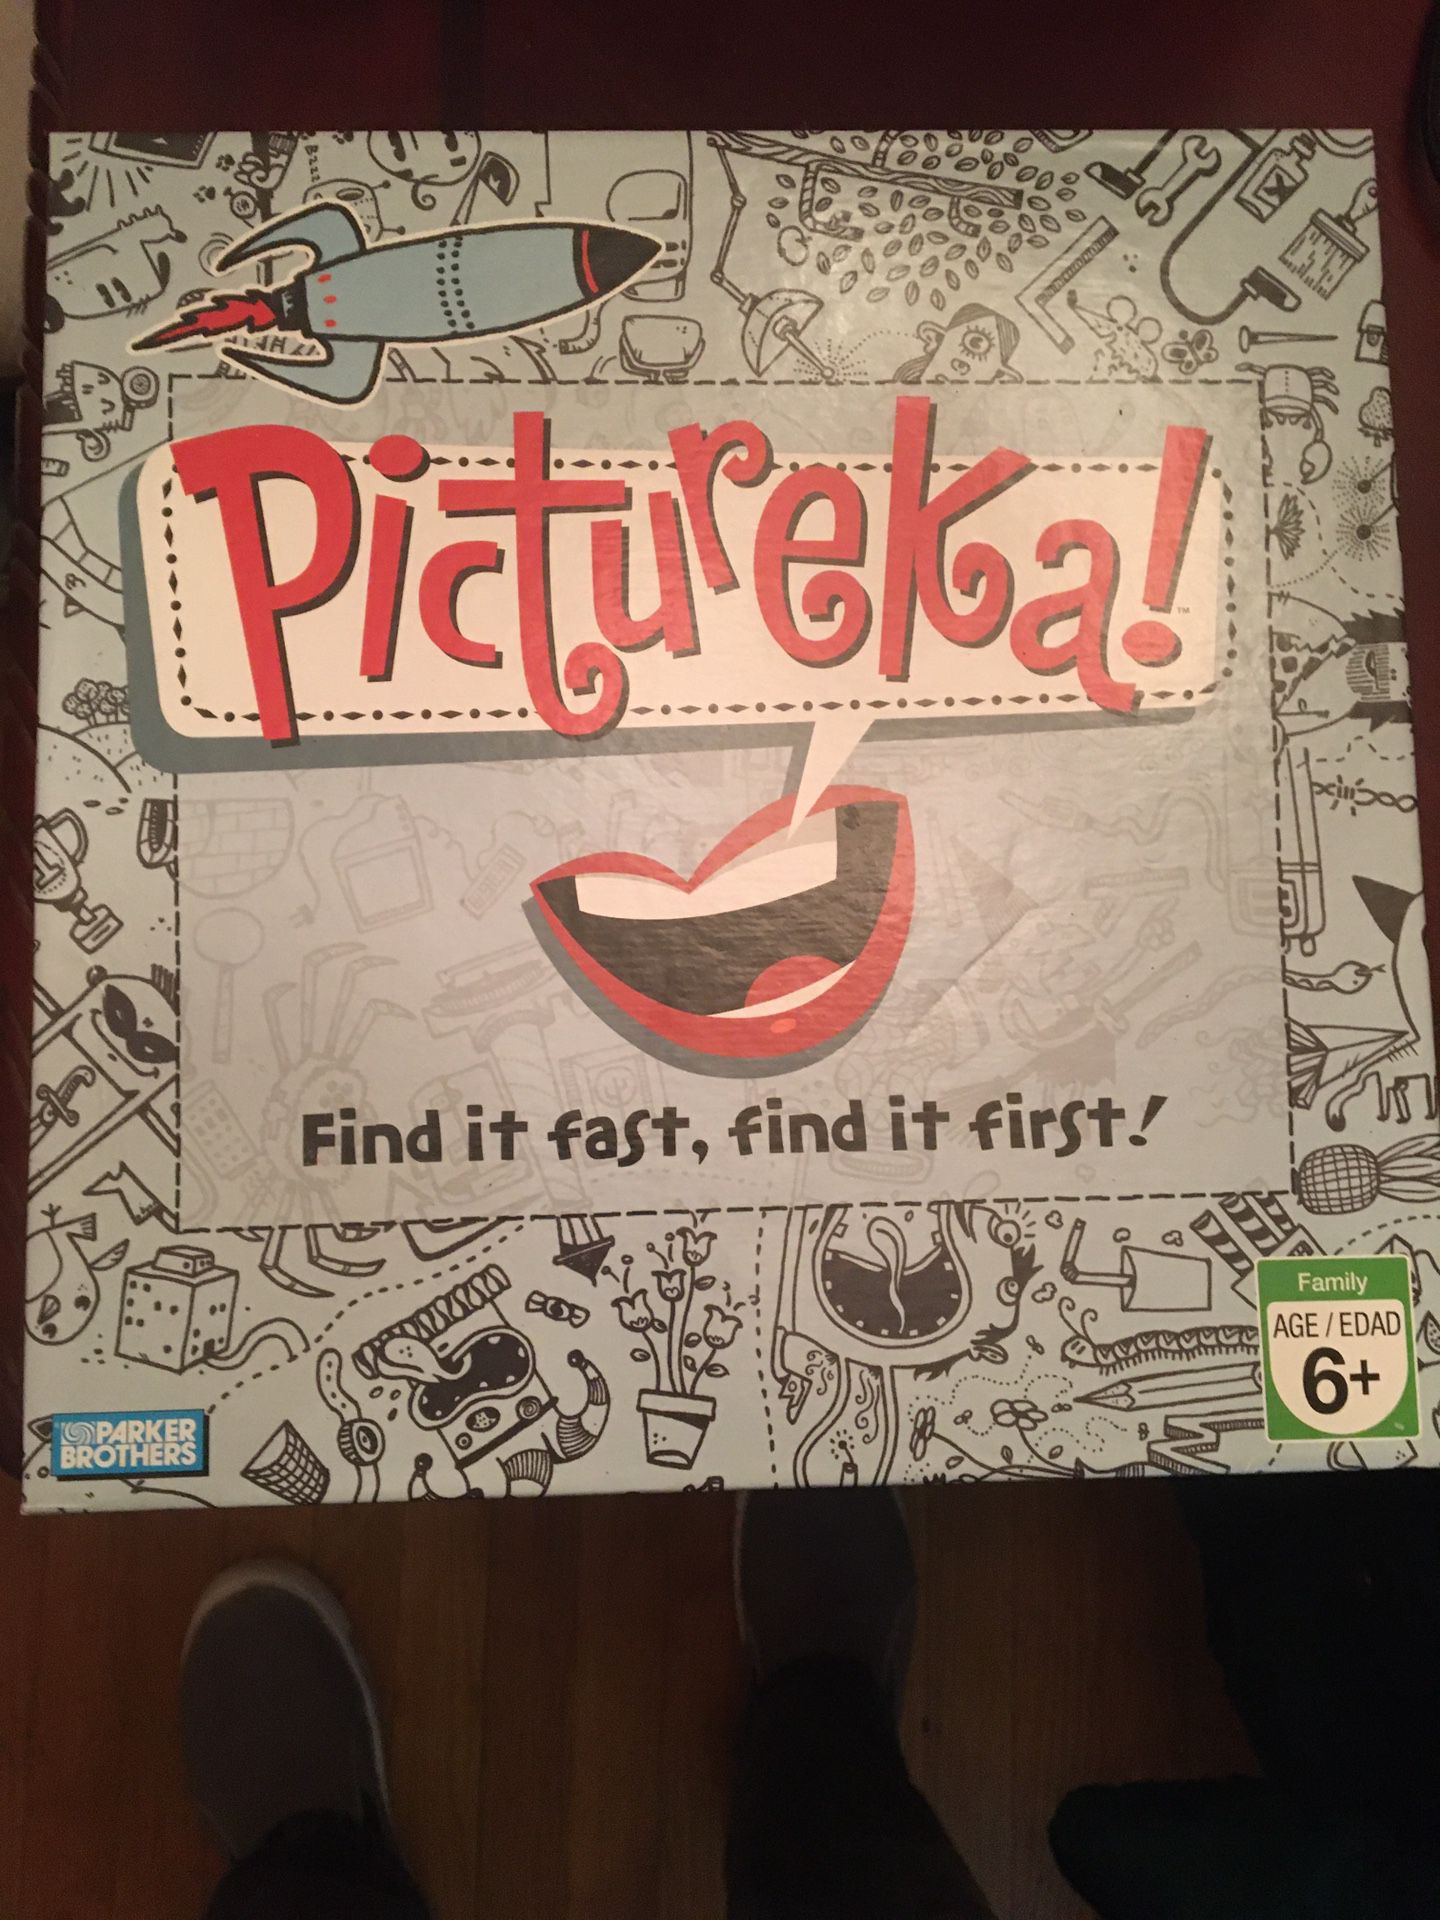 Parker brothers pictureka board game